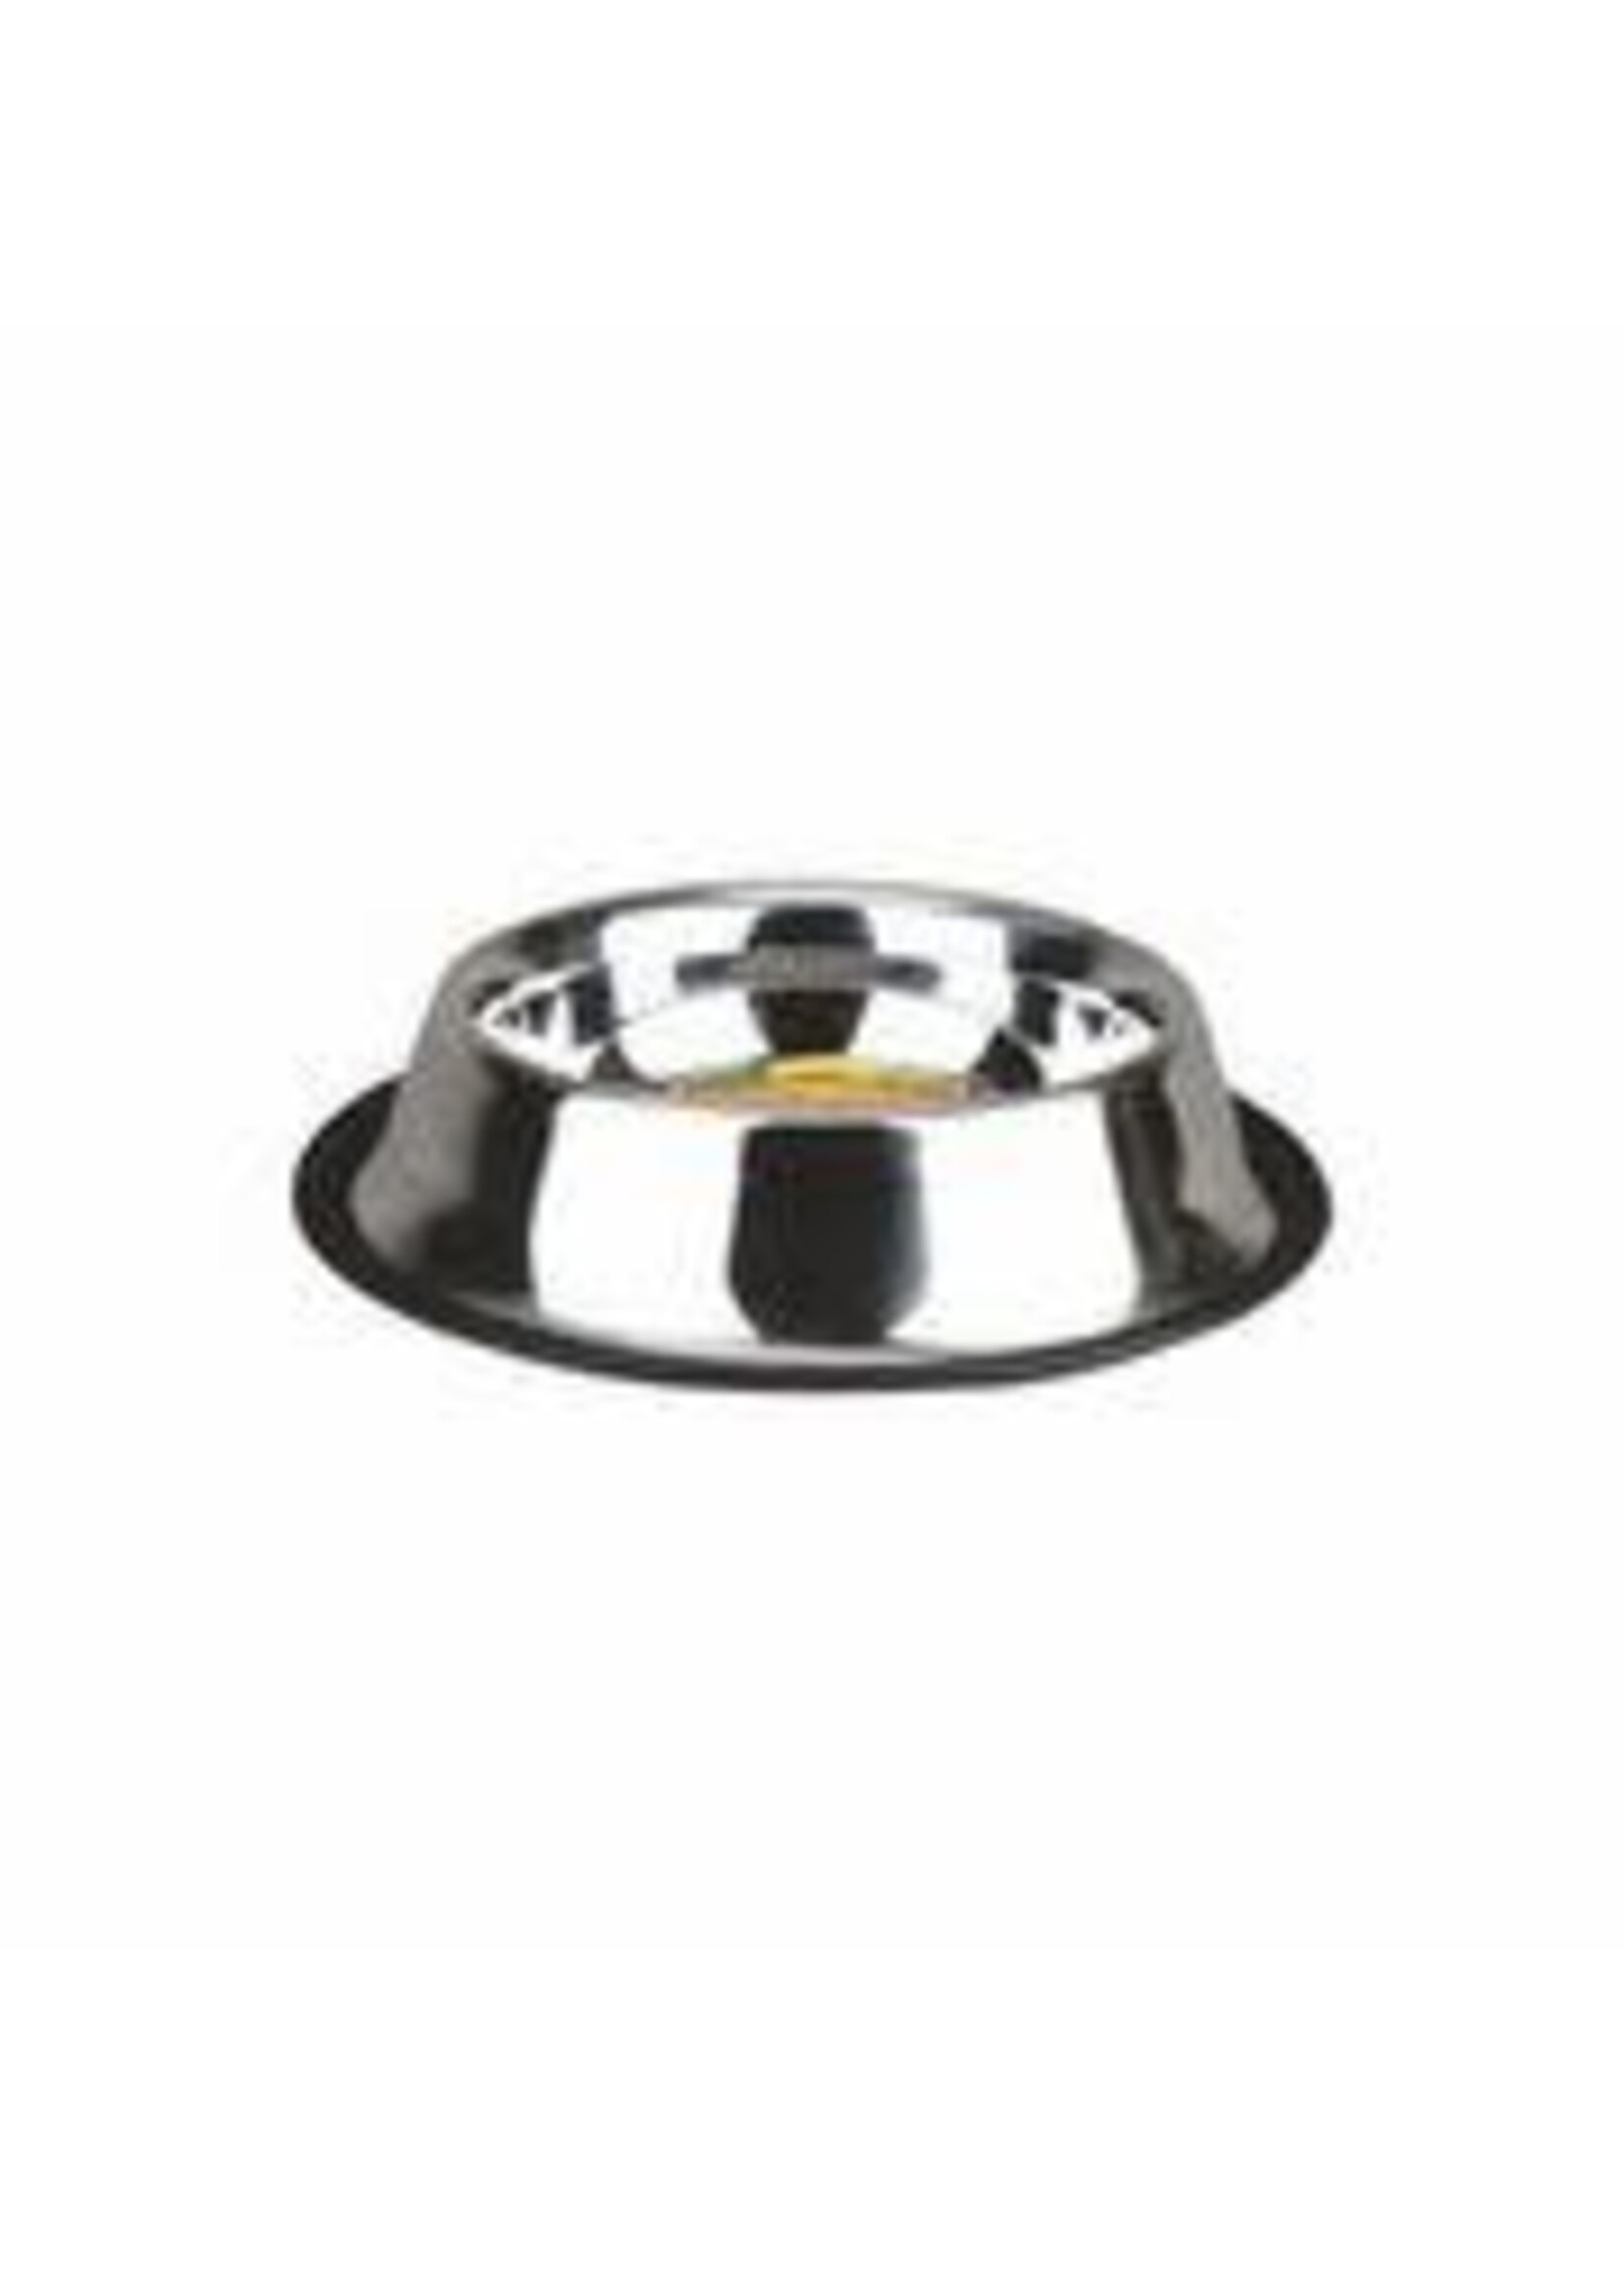 Tailfin Sports Advanced Pet Products Stainless Steel Bowl - 16 oz.